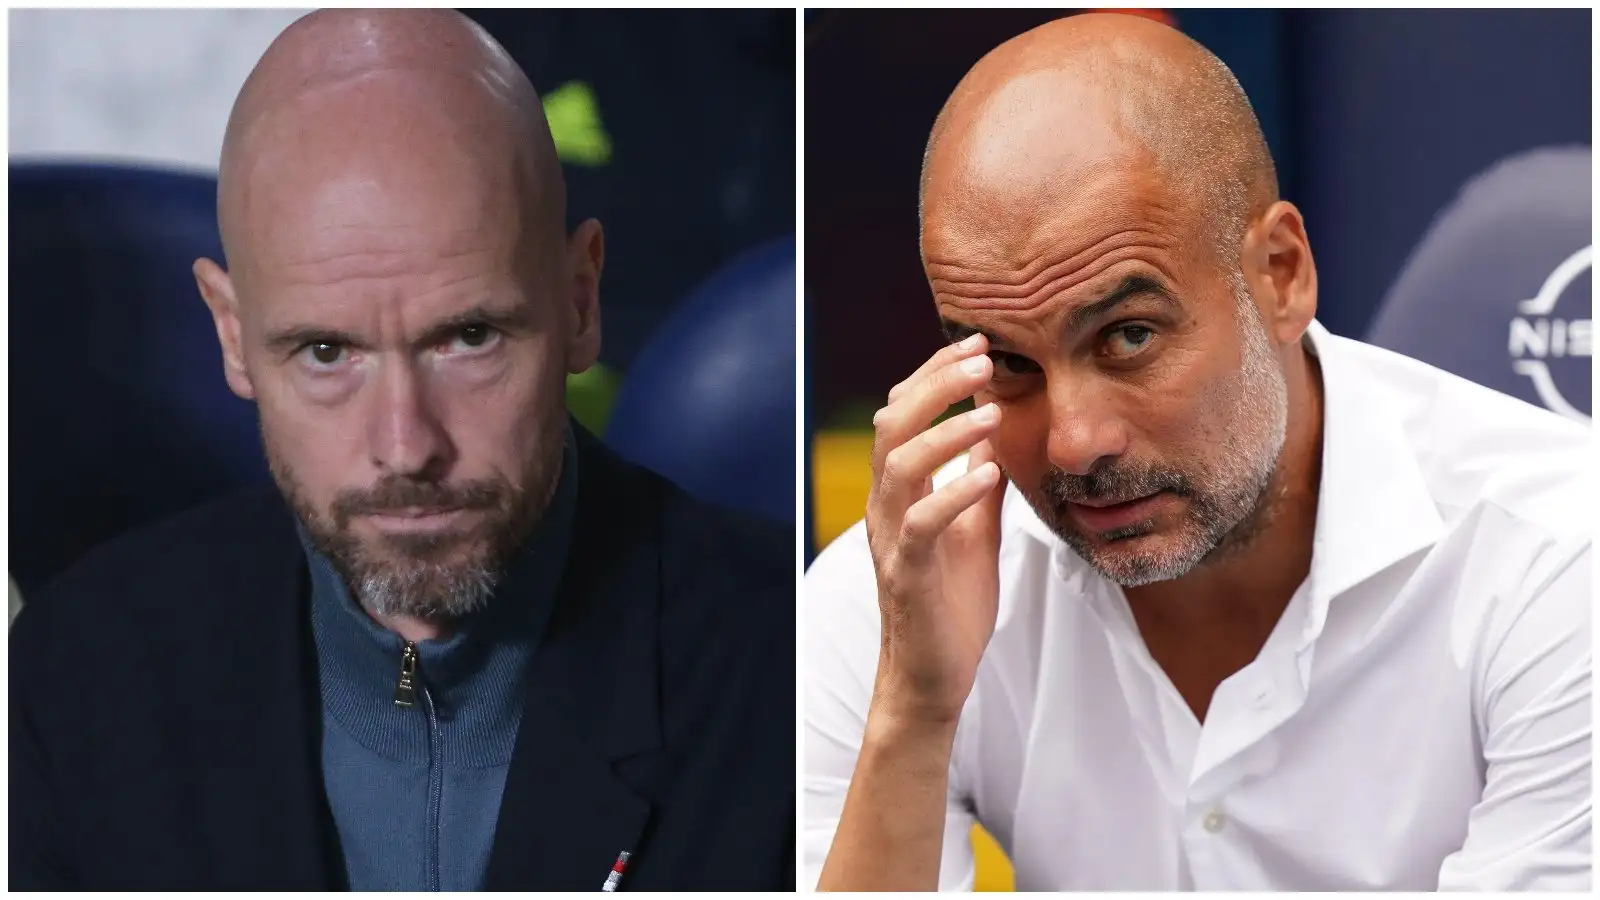 Manchester United manager Erik ten Hag and Manchester City boss Pep Guardiola.